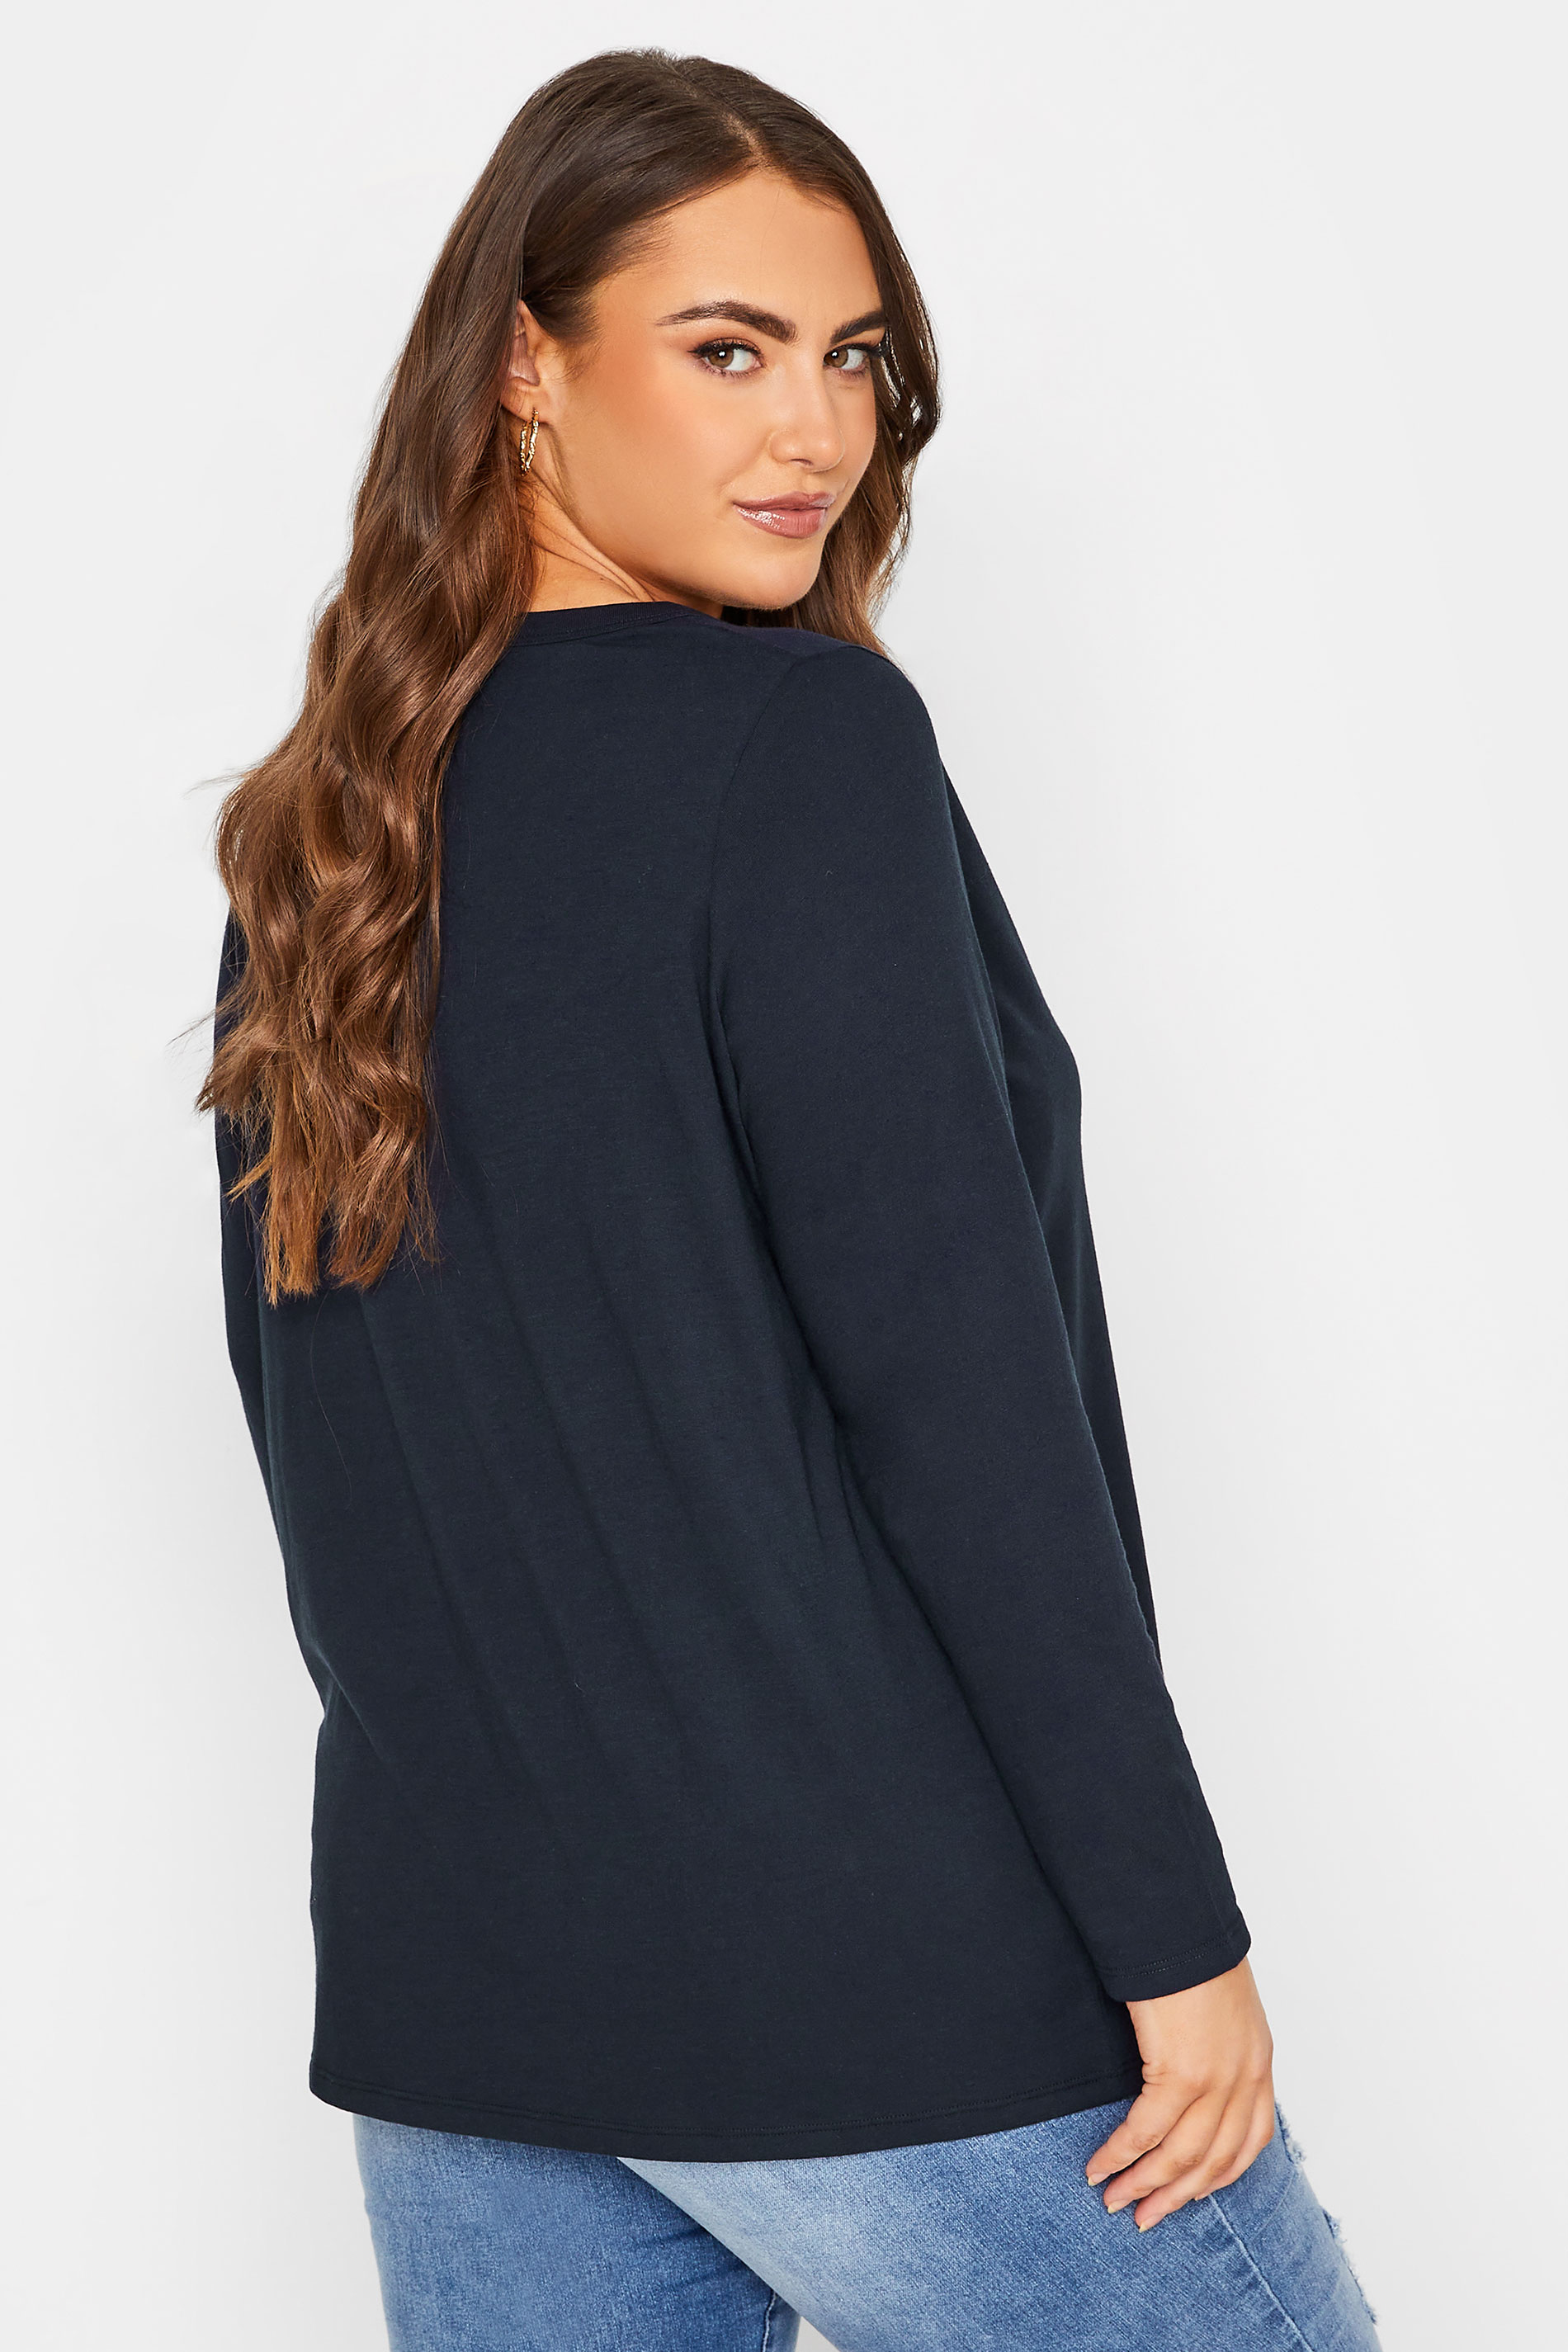 Plus Size Navy Blue Long Sleeve T-Shirt | Yours Clothing 3